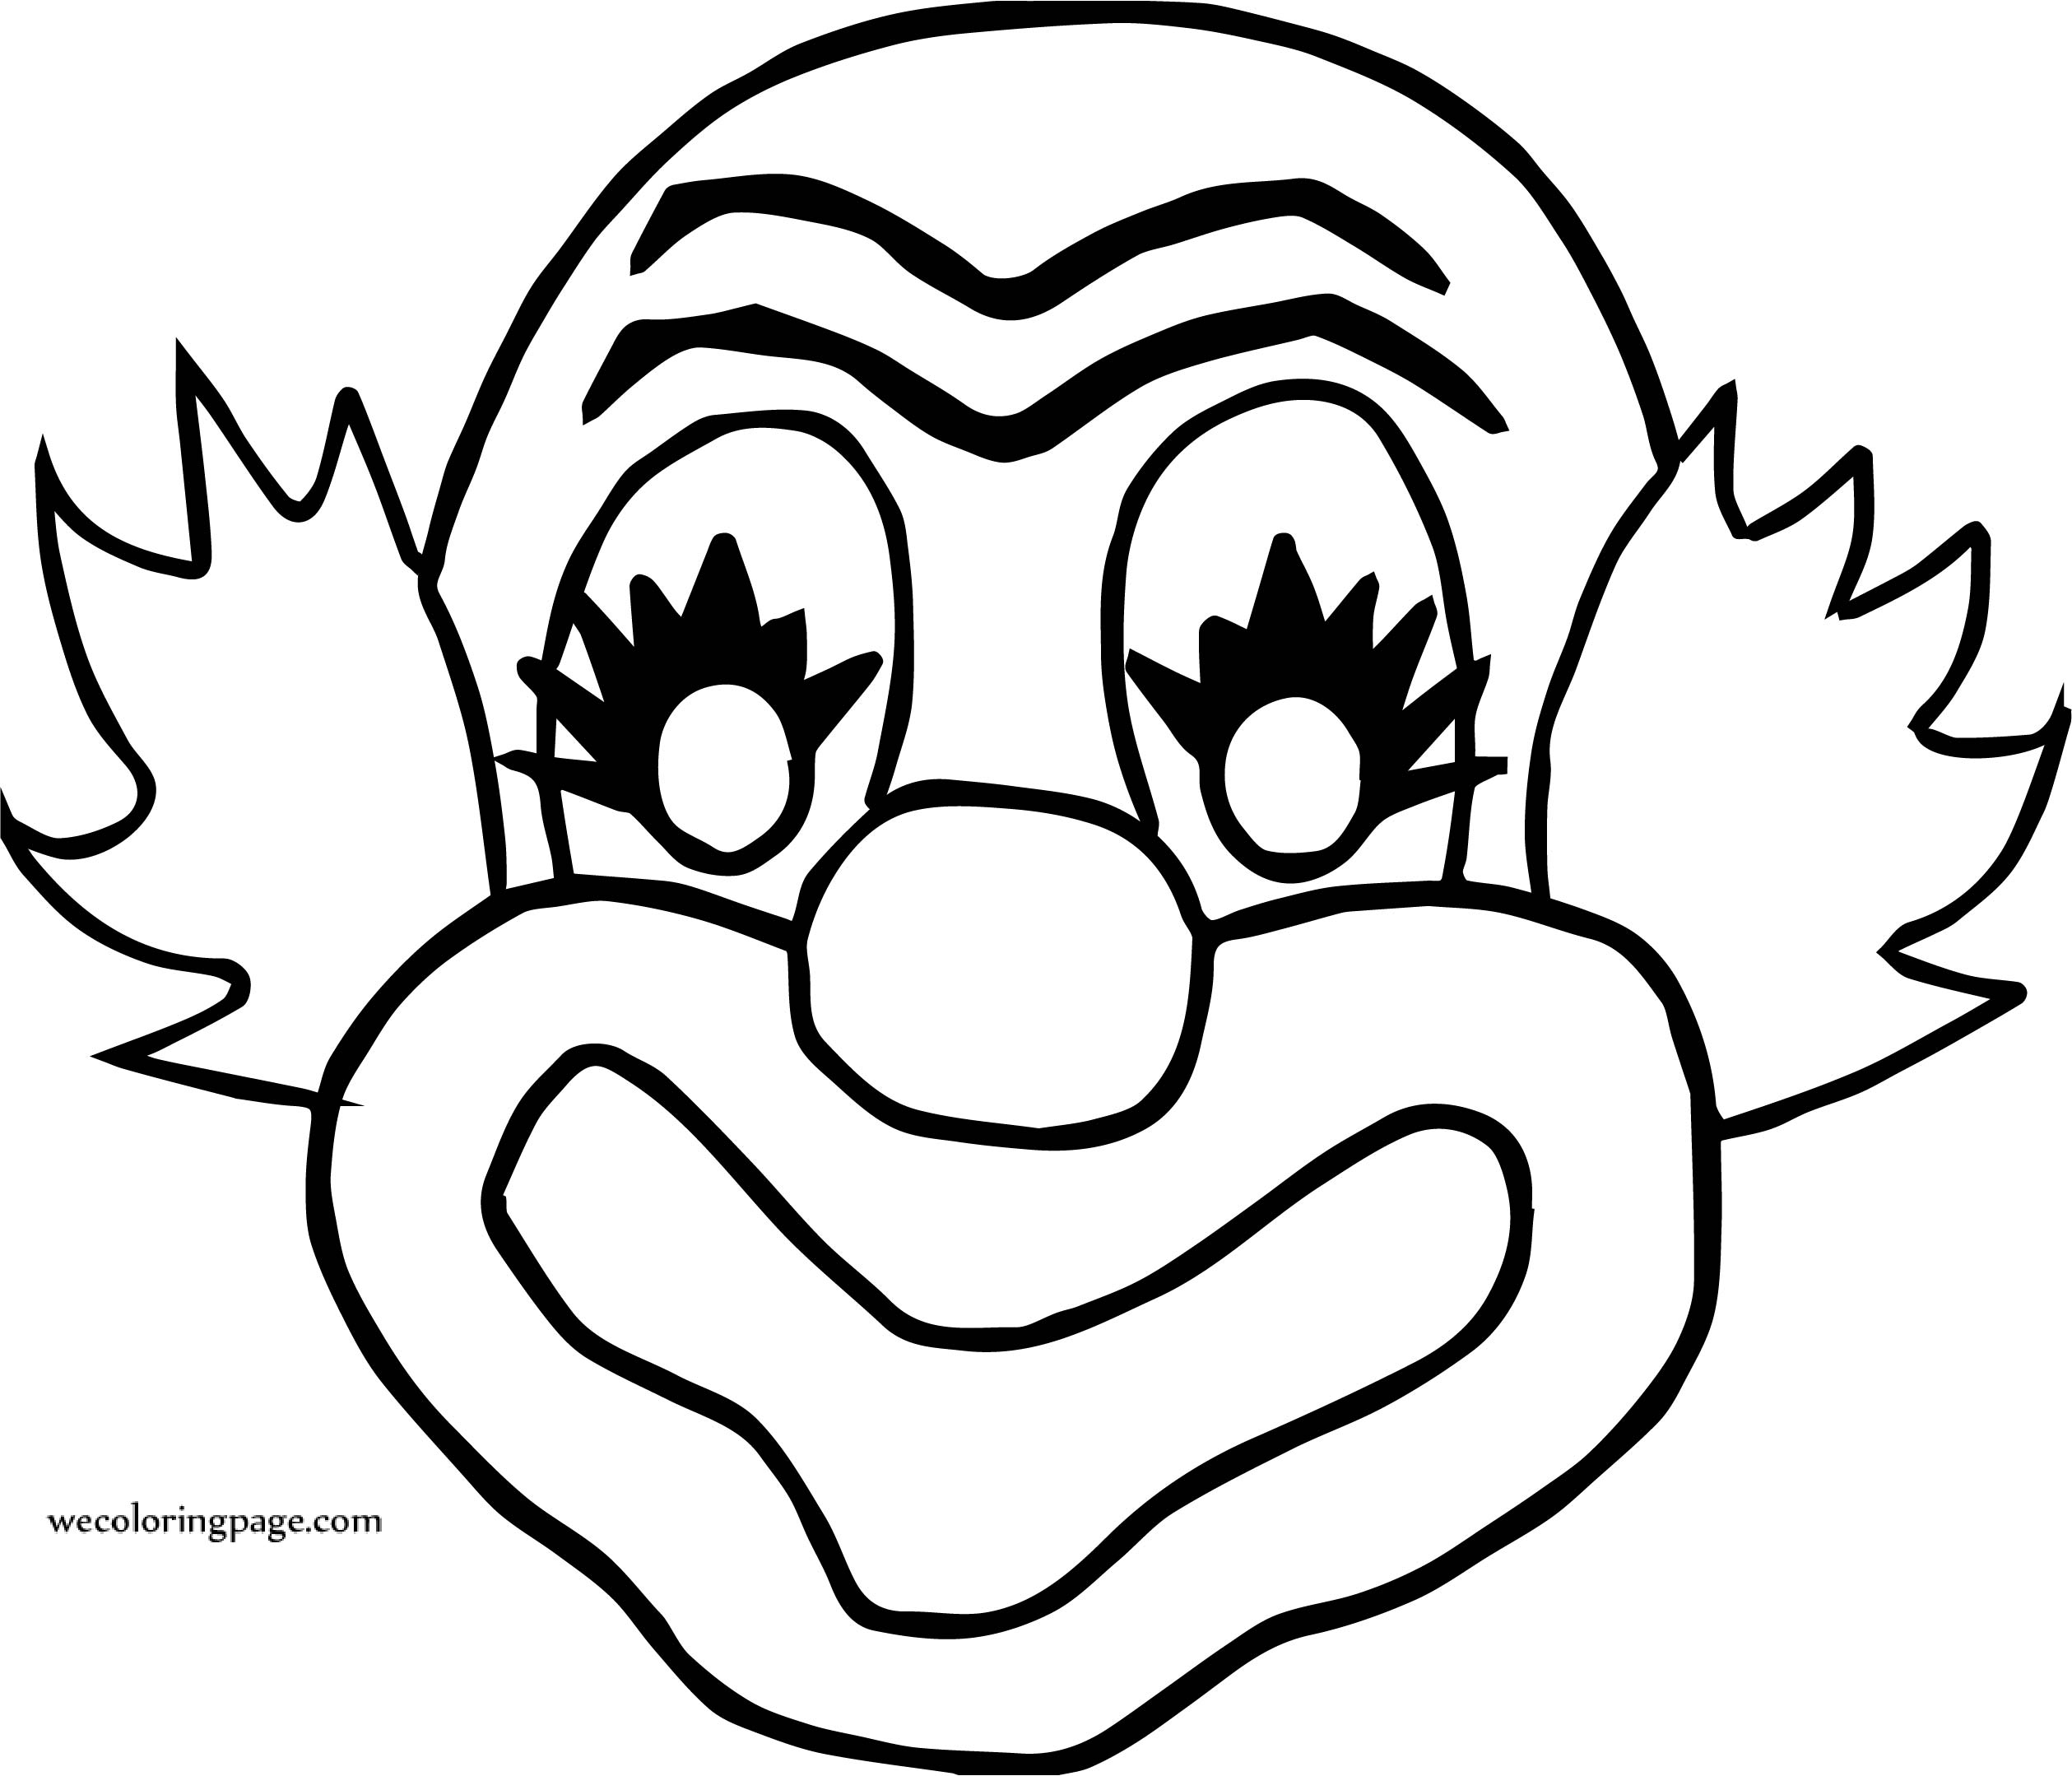 Clown Face Coloring Page at Free printable colorings